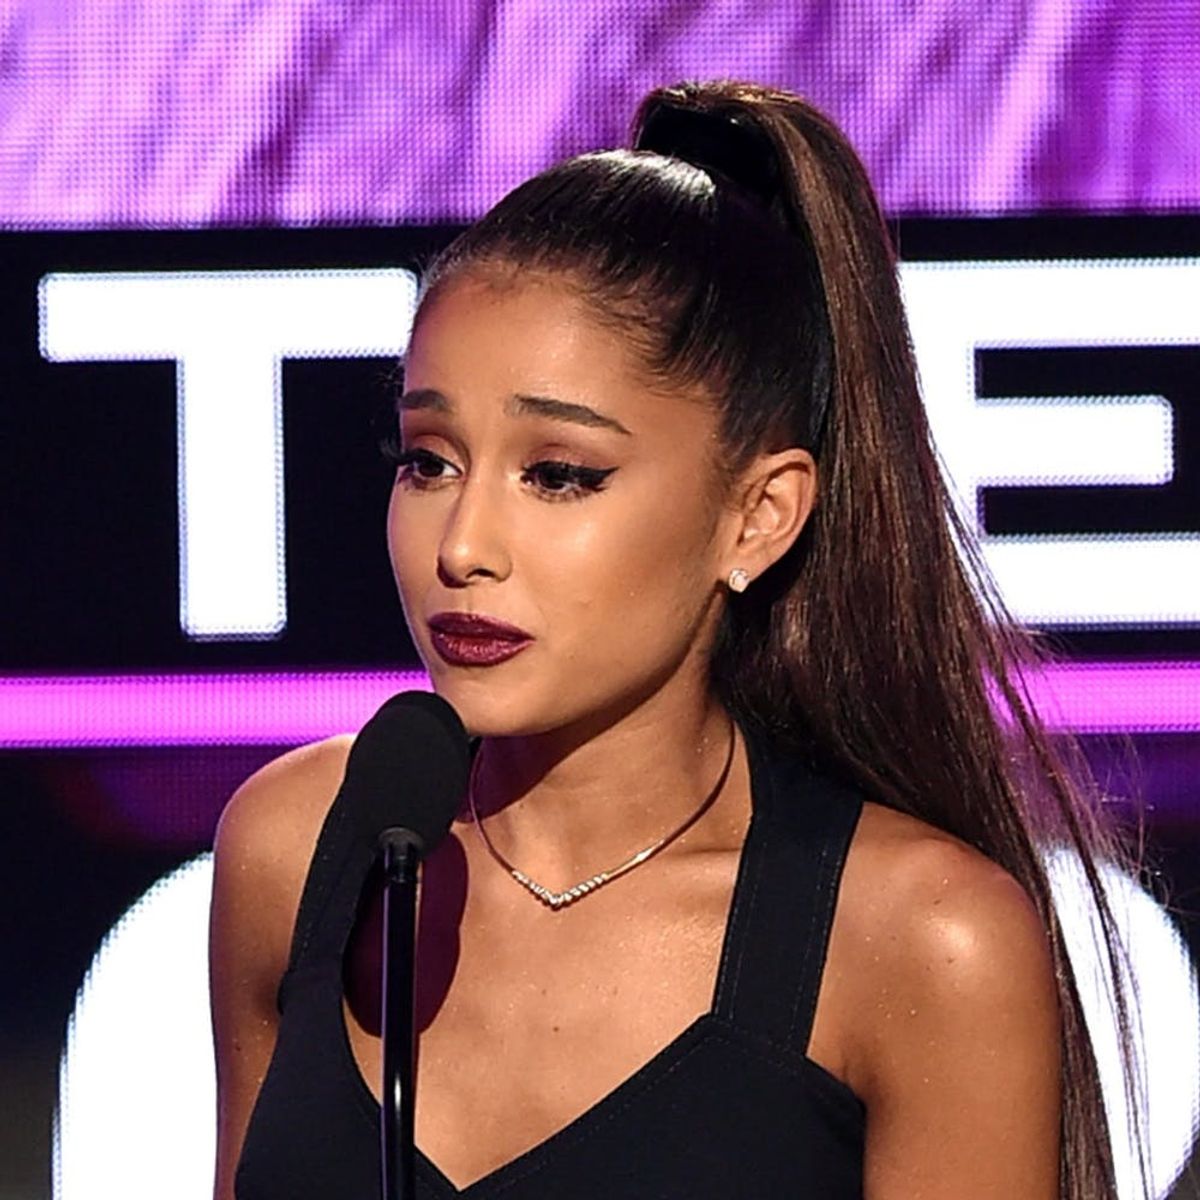 Ariana Grande and More Celebs React to the News of the Manchester ...